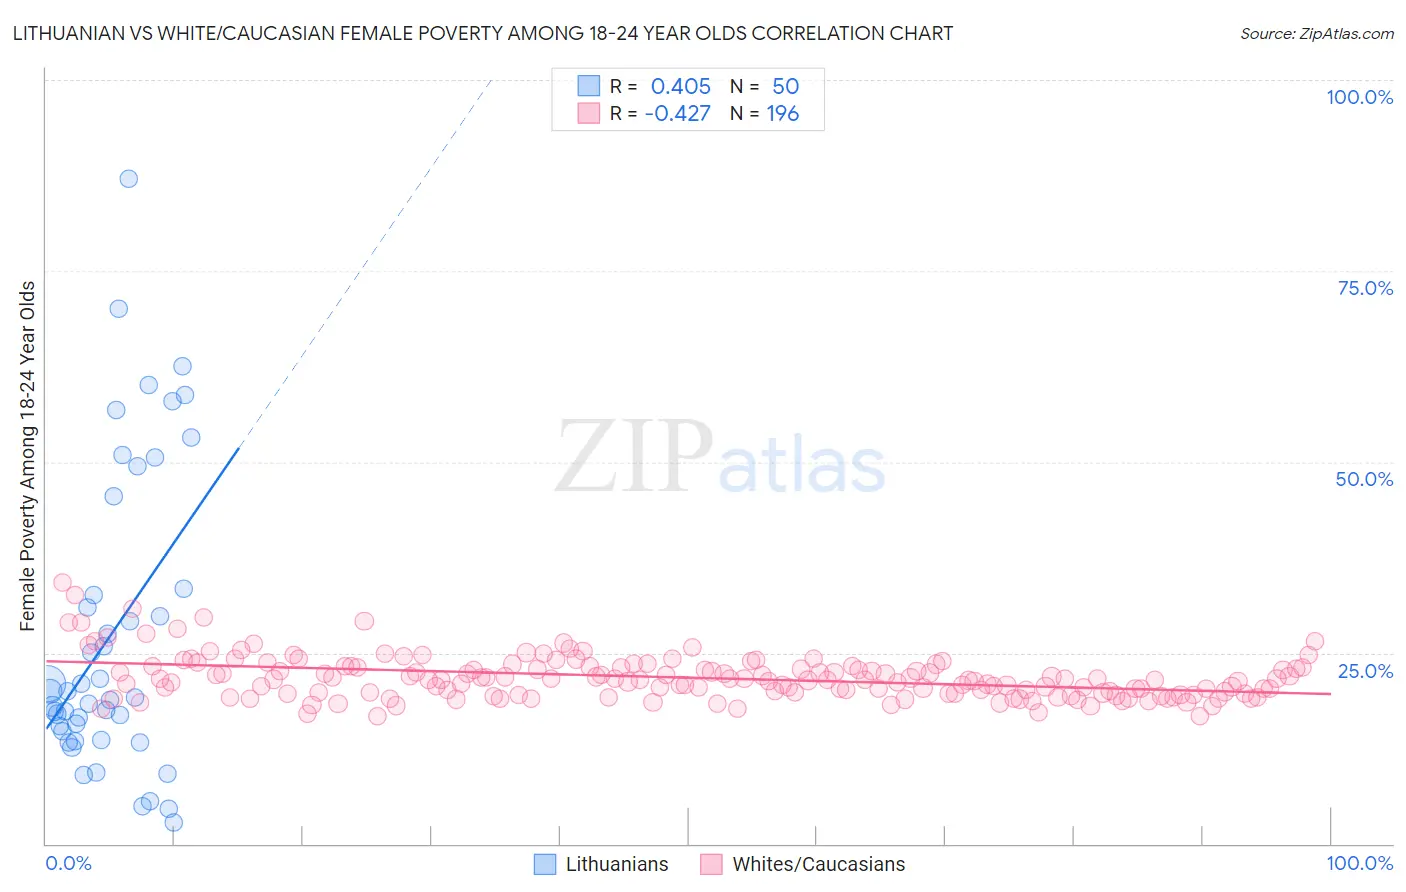 Lithuanian vs White/Caucasian Female Poverty Among 18-24 Year Olds